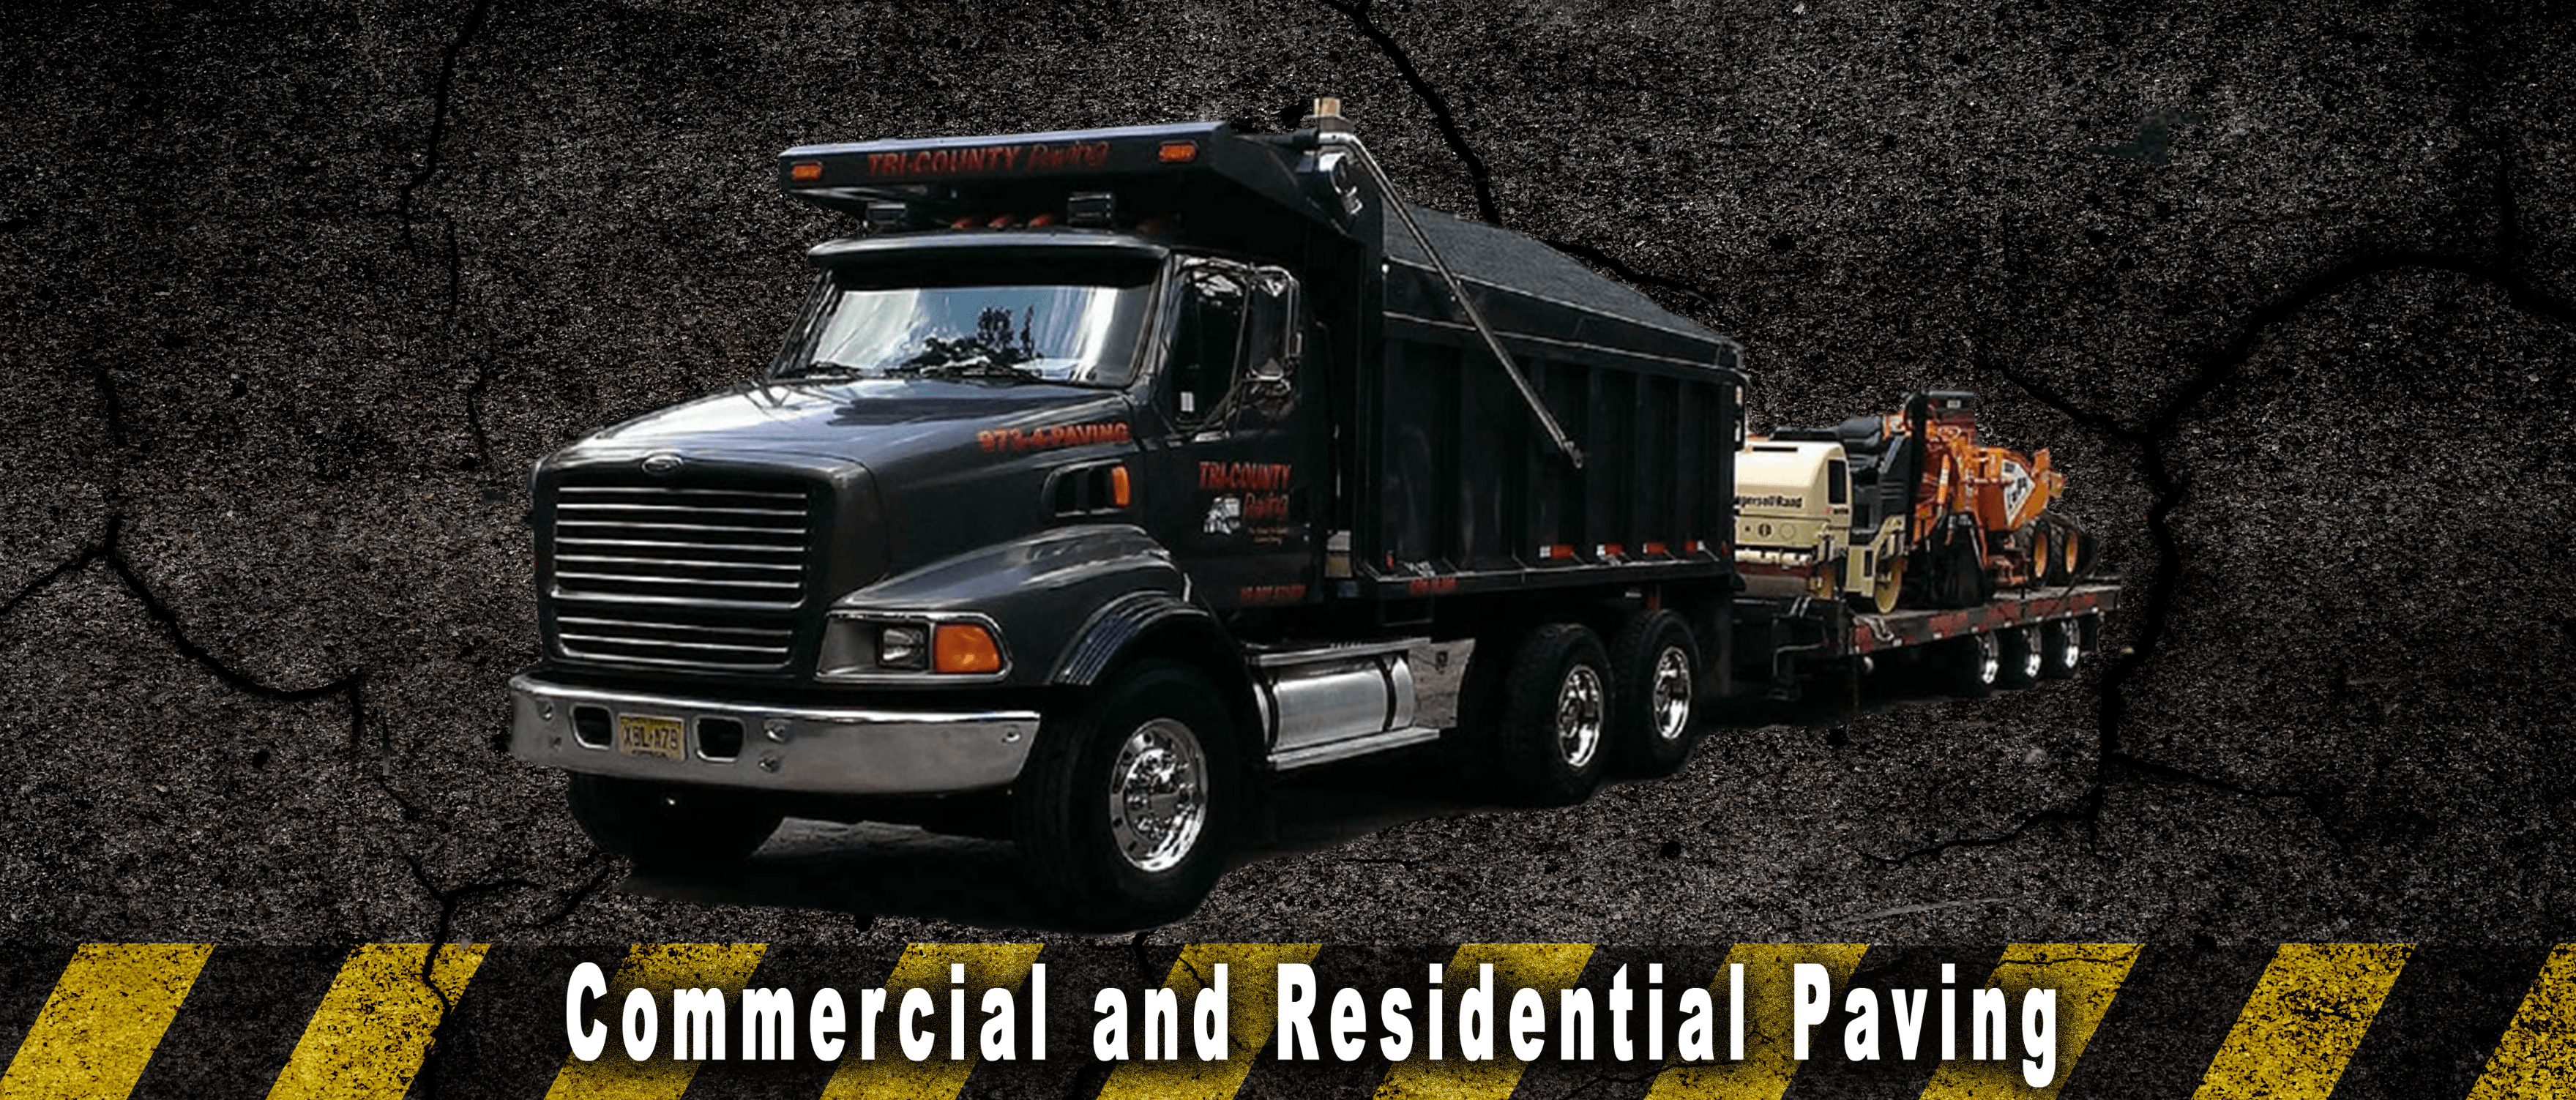 Paving Middlesex County New Jersey and surrounding areas